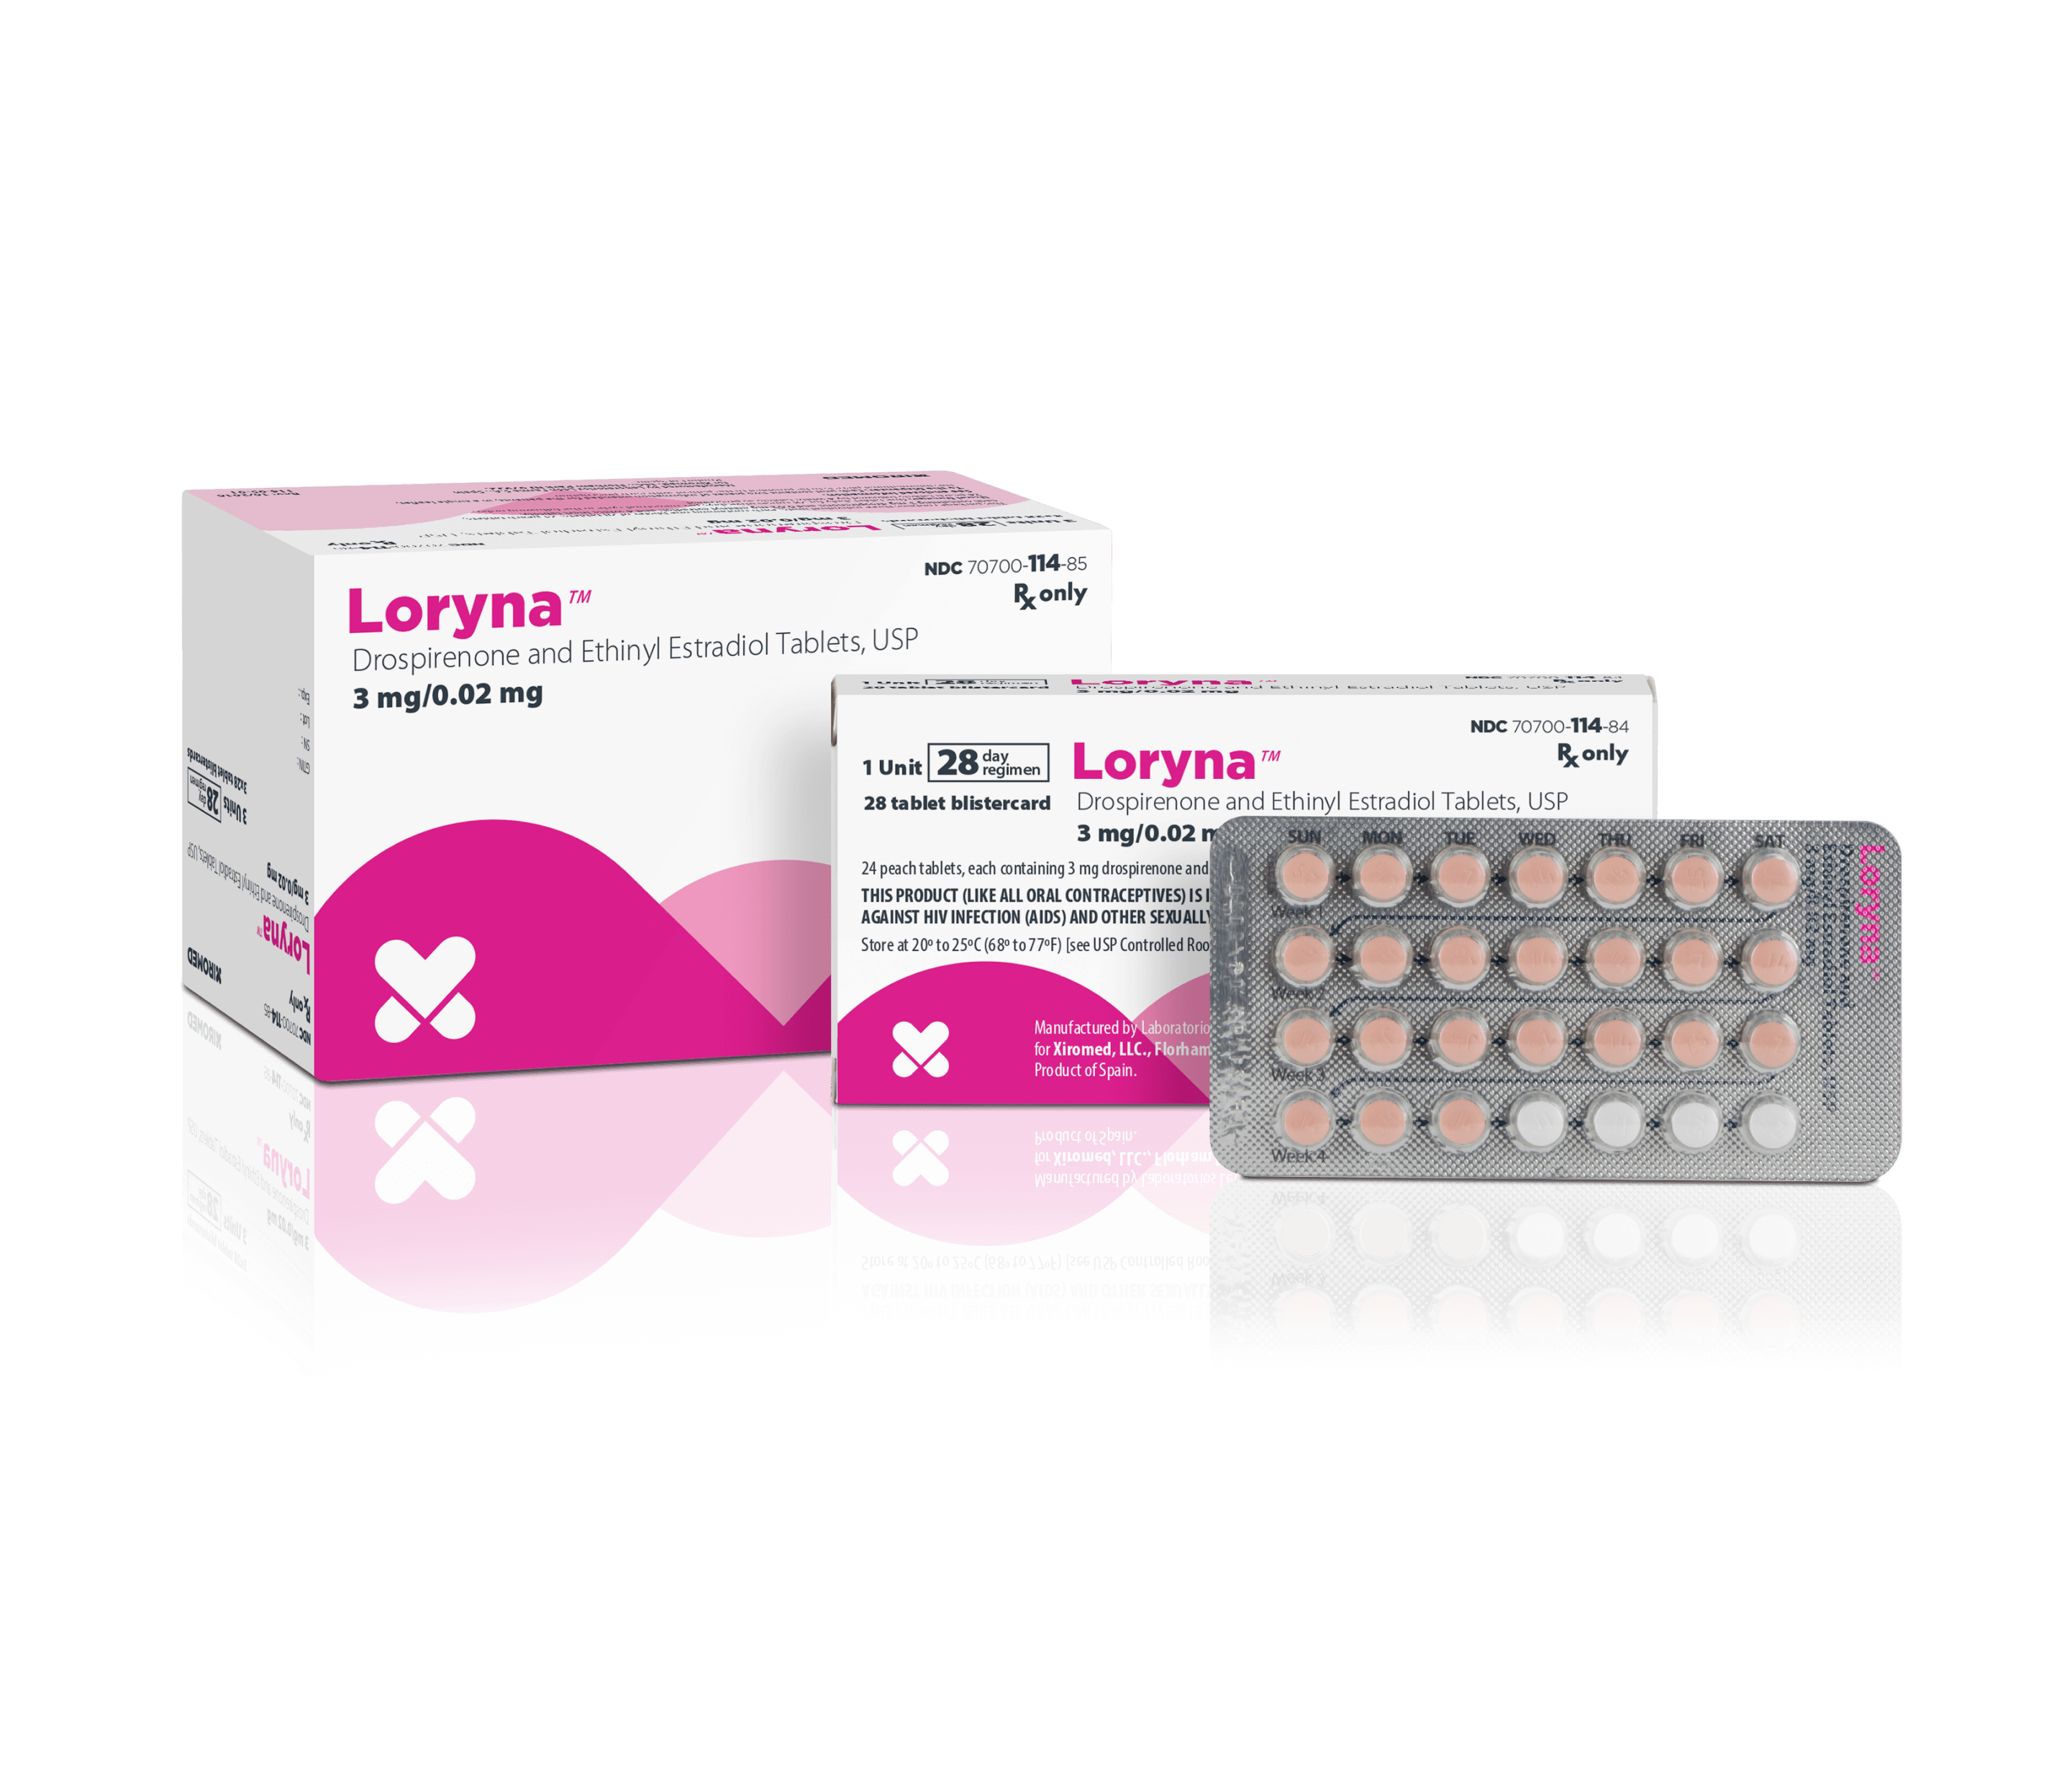 Loryna Product Details